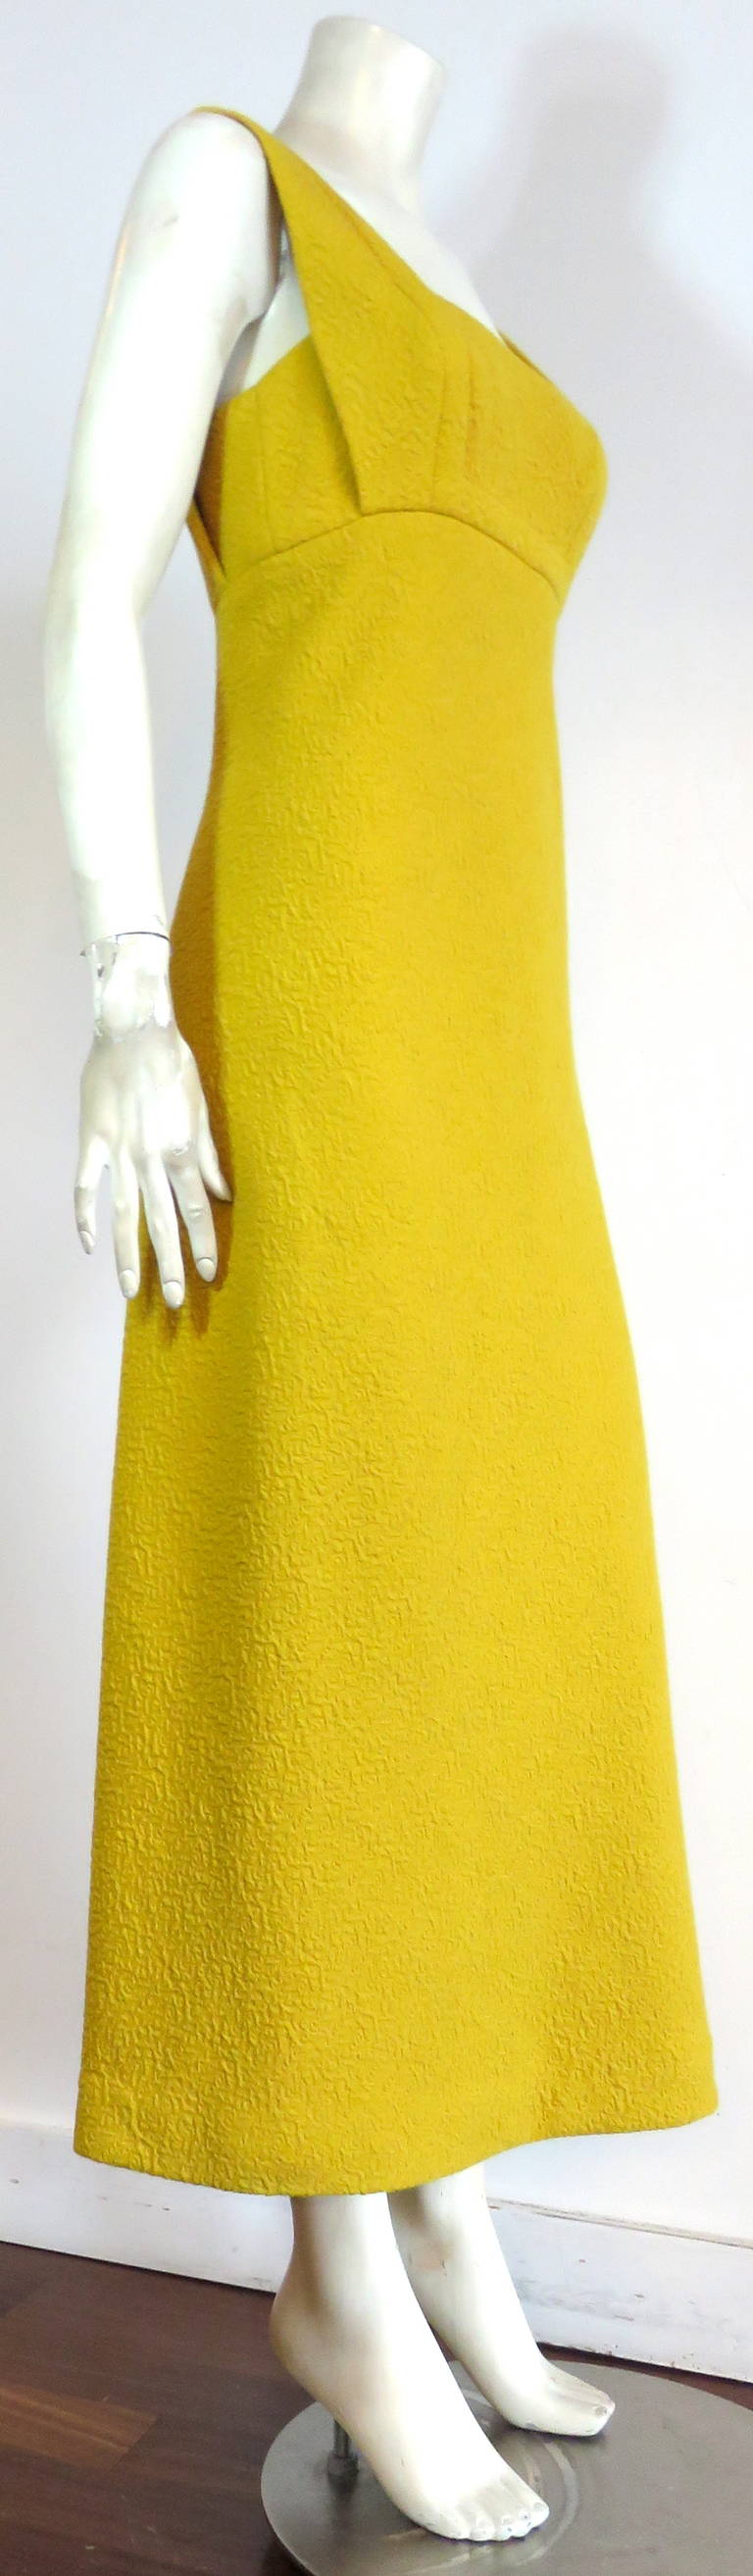 1960's GALANOS yellow, knit crepe empire dress, originally purchased at Amelia Gray, Beverly Hills.

This wonderful knit crepe dress features square cut front and back neckline with single topstitching detailing.   

Concealed side seam zipper